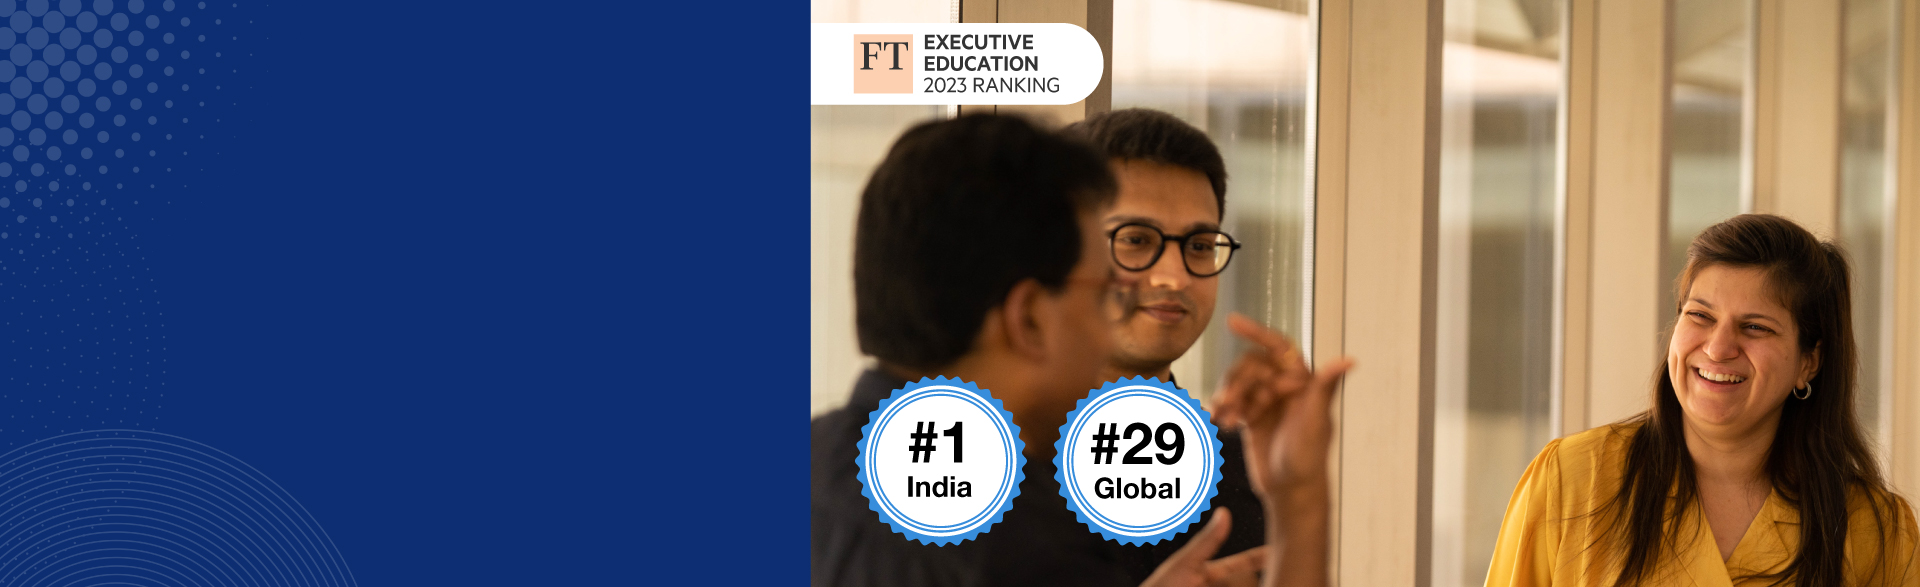 ISB ranks #1 in India and #29 globally in the FT Executive Education Custom Ranking 2023